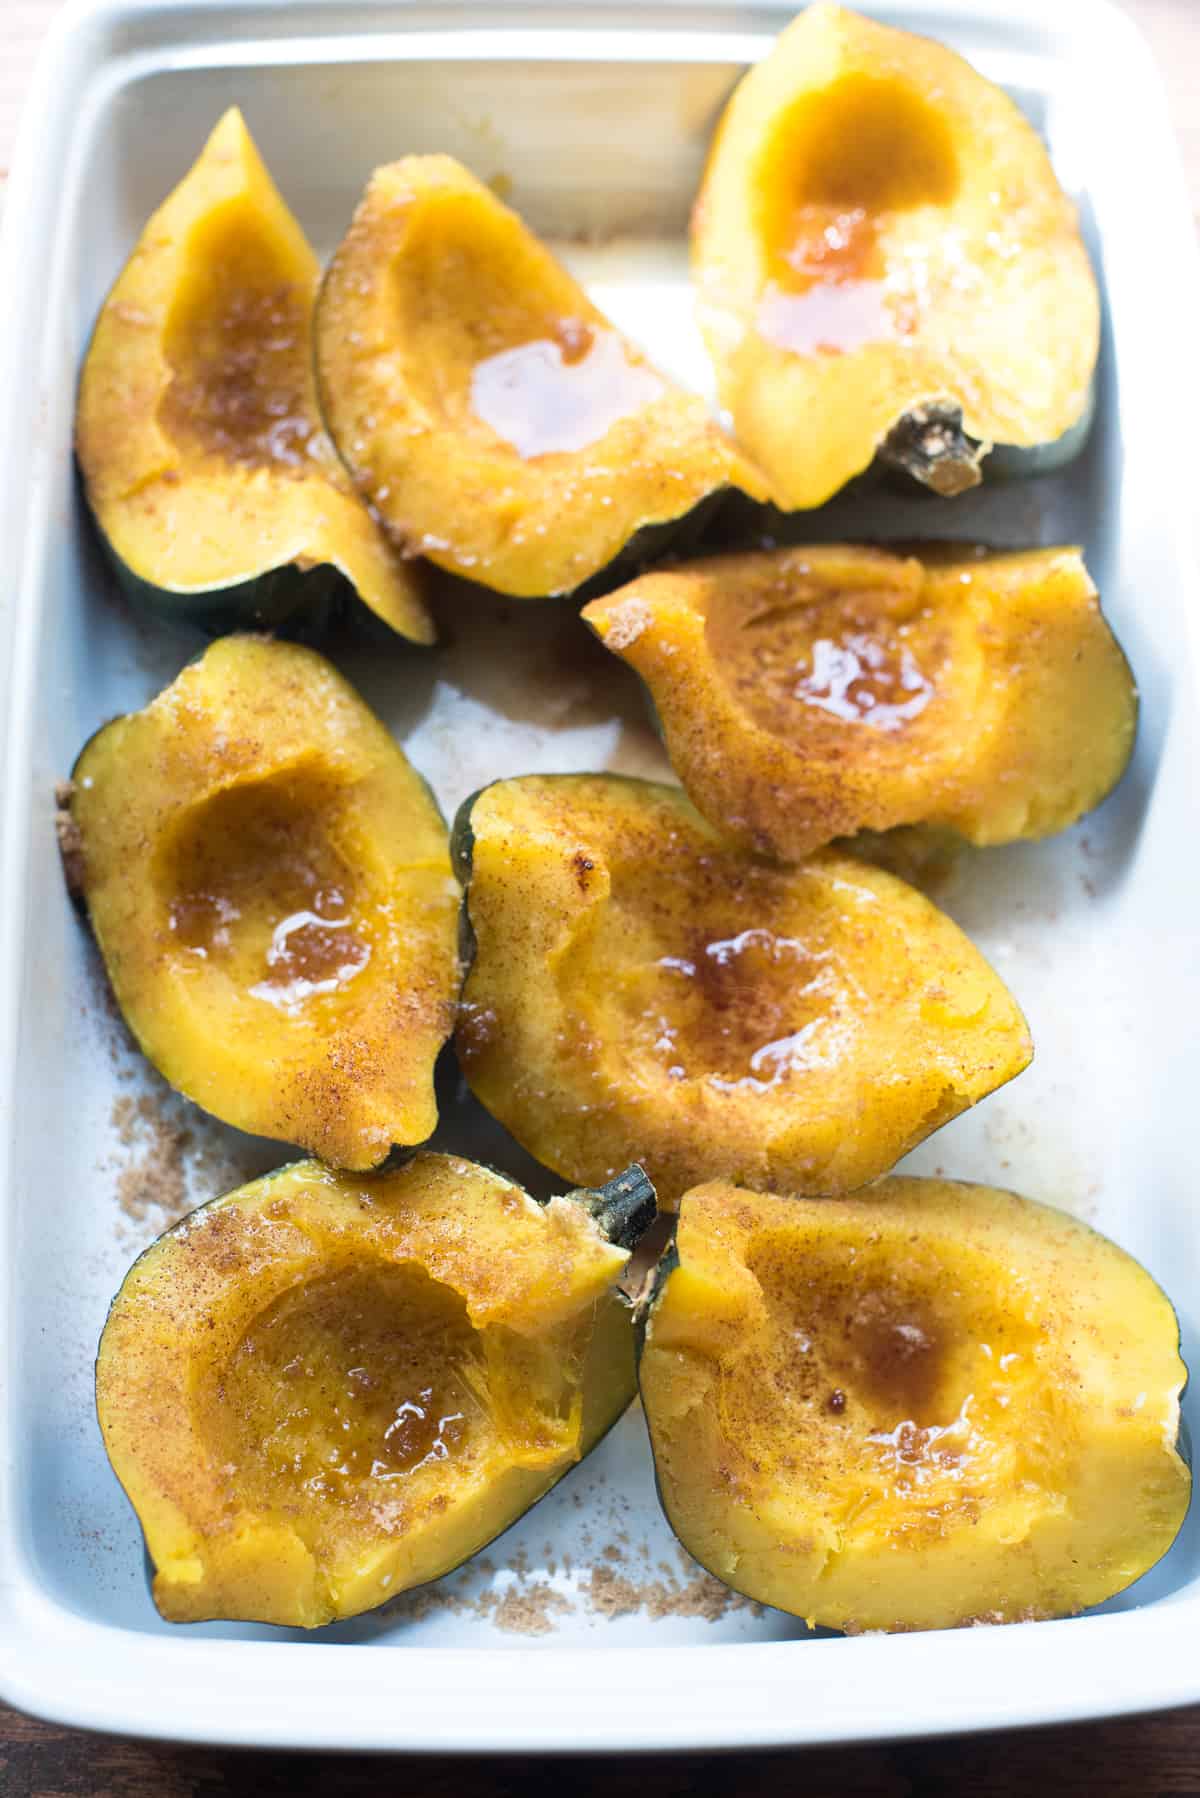 Pieces of baked acorn squash with butter and brown sugar in a white baking dish.